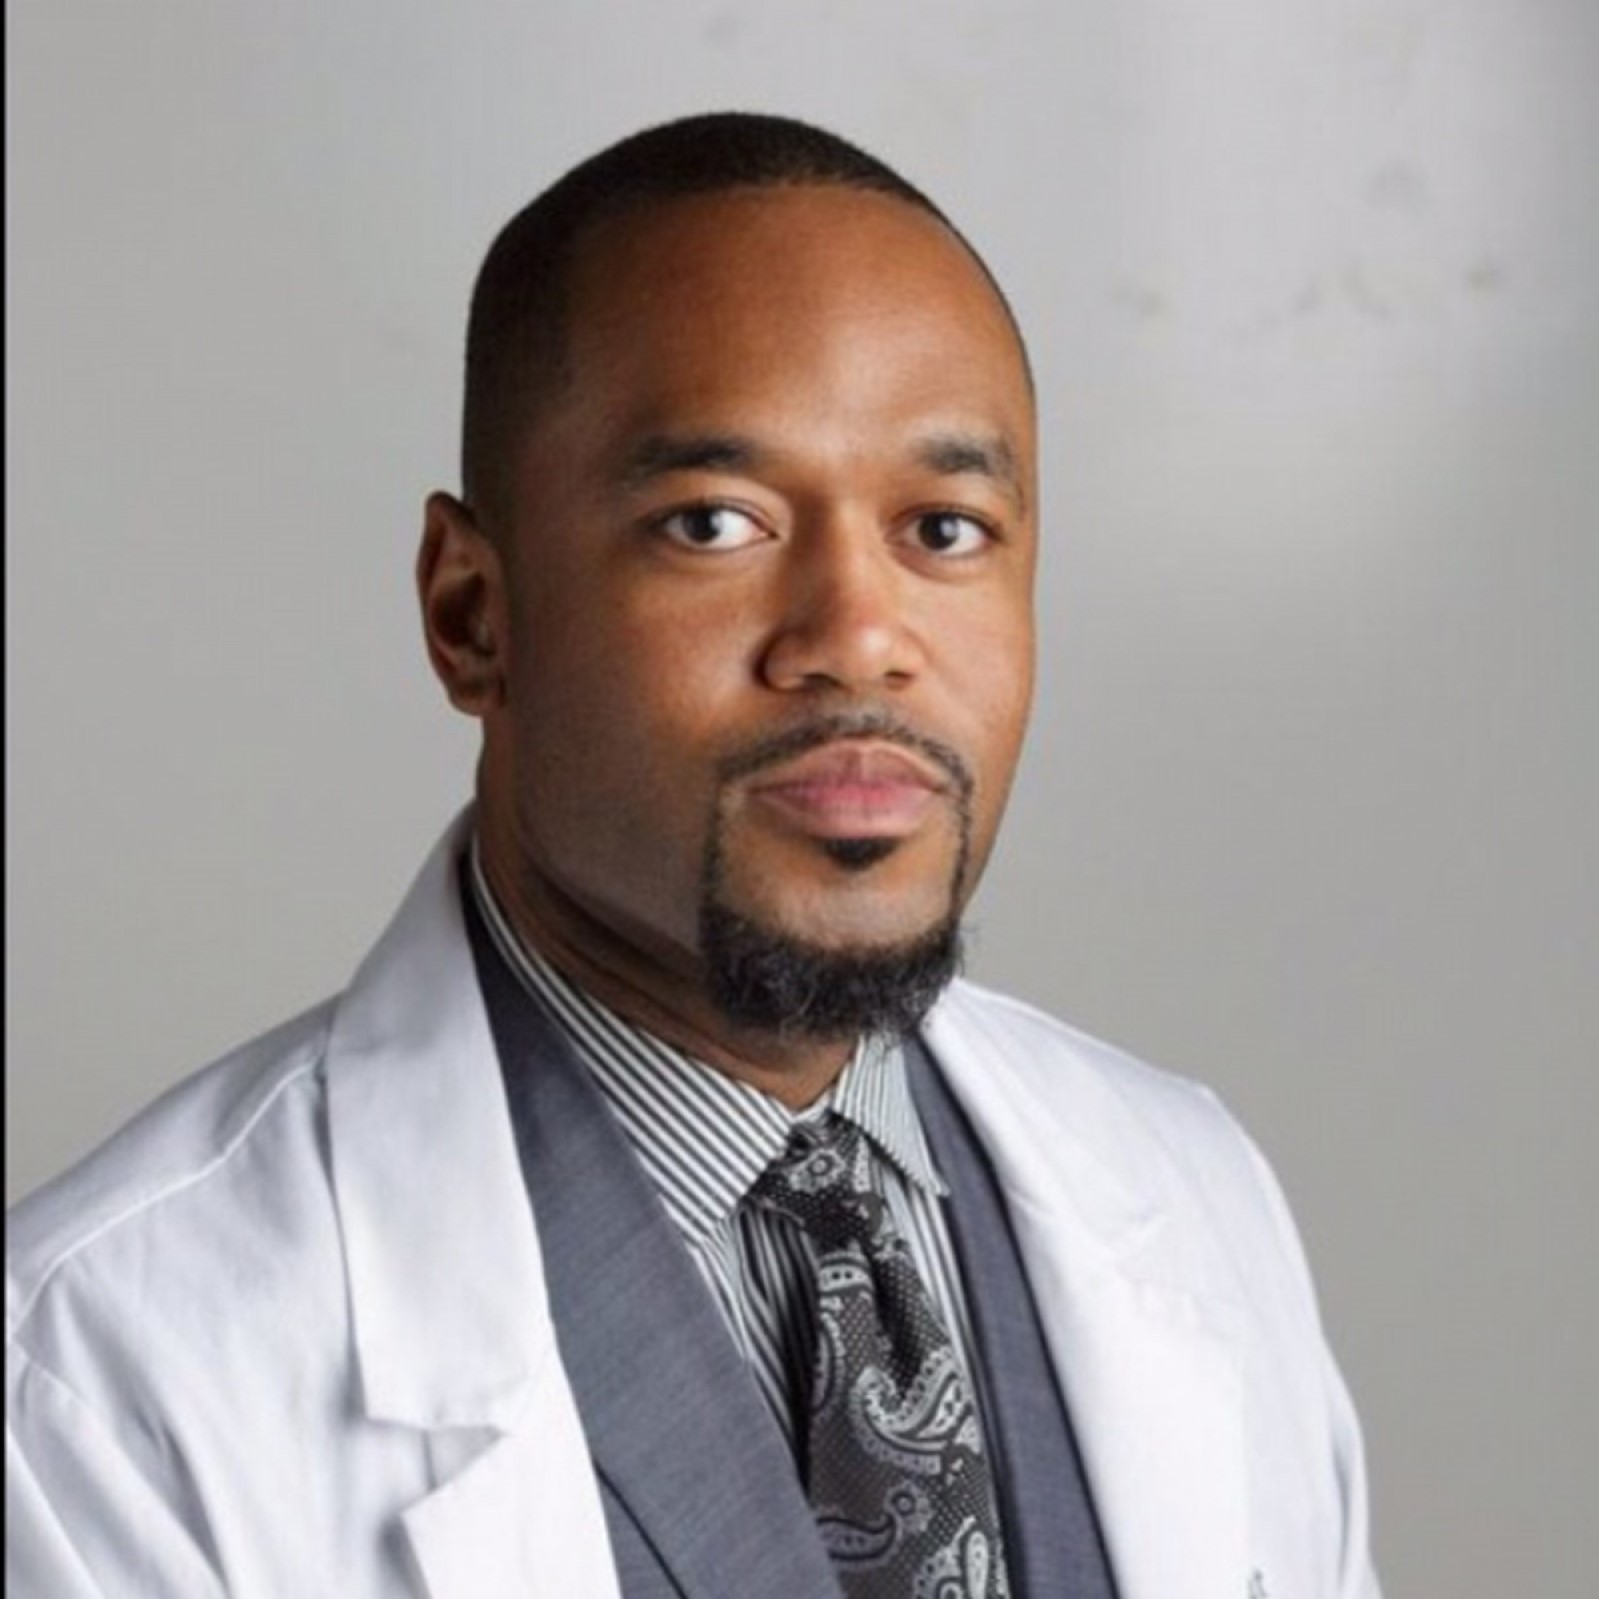 Dr. Justin Young